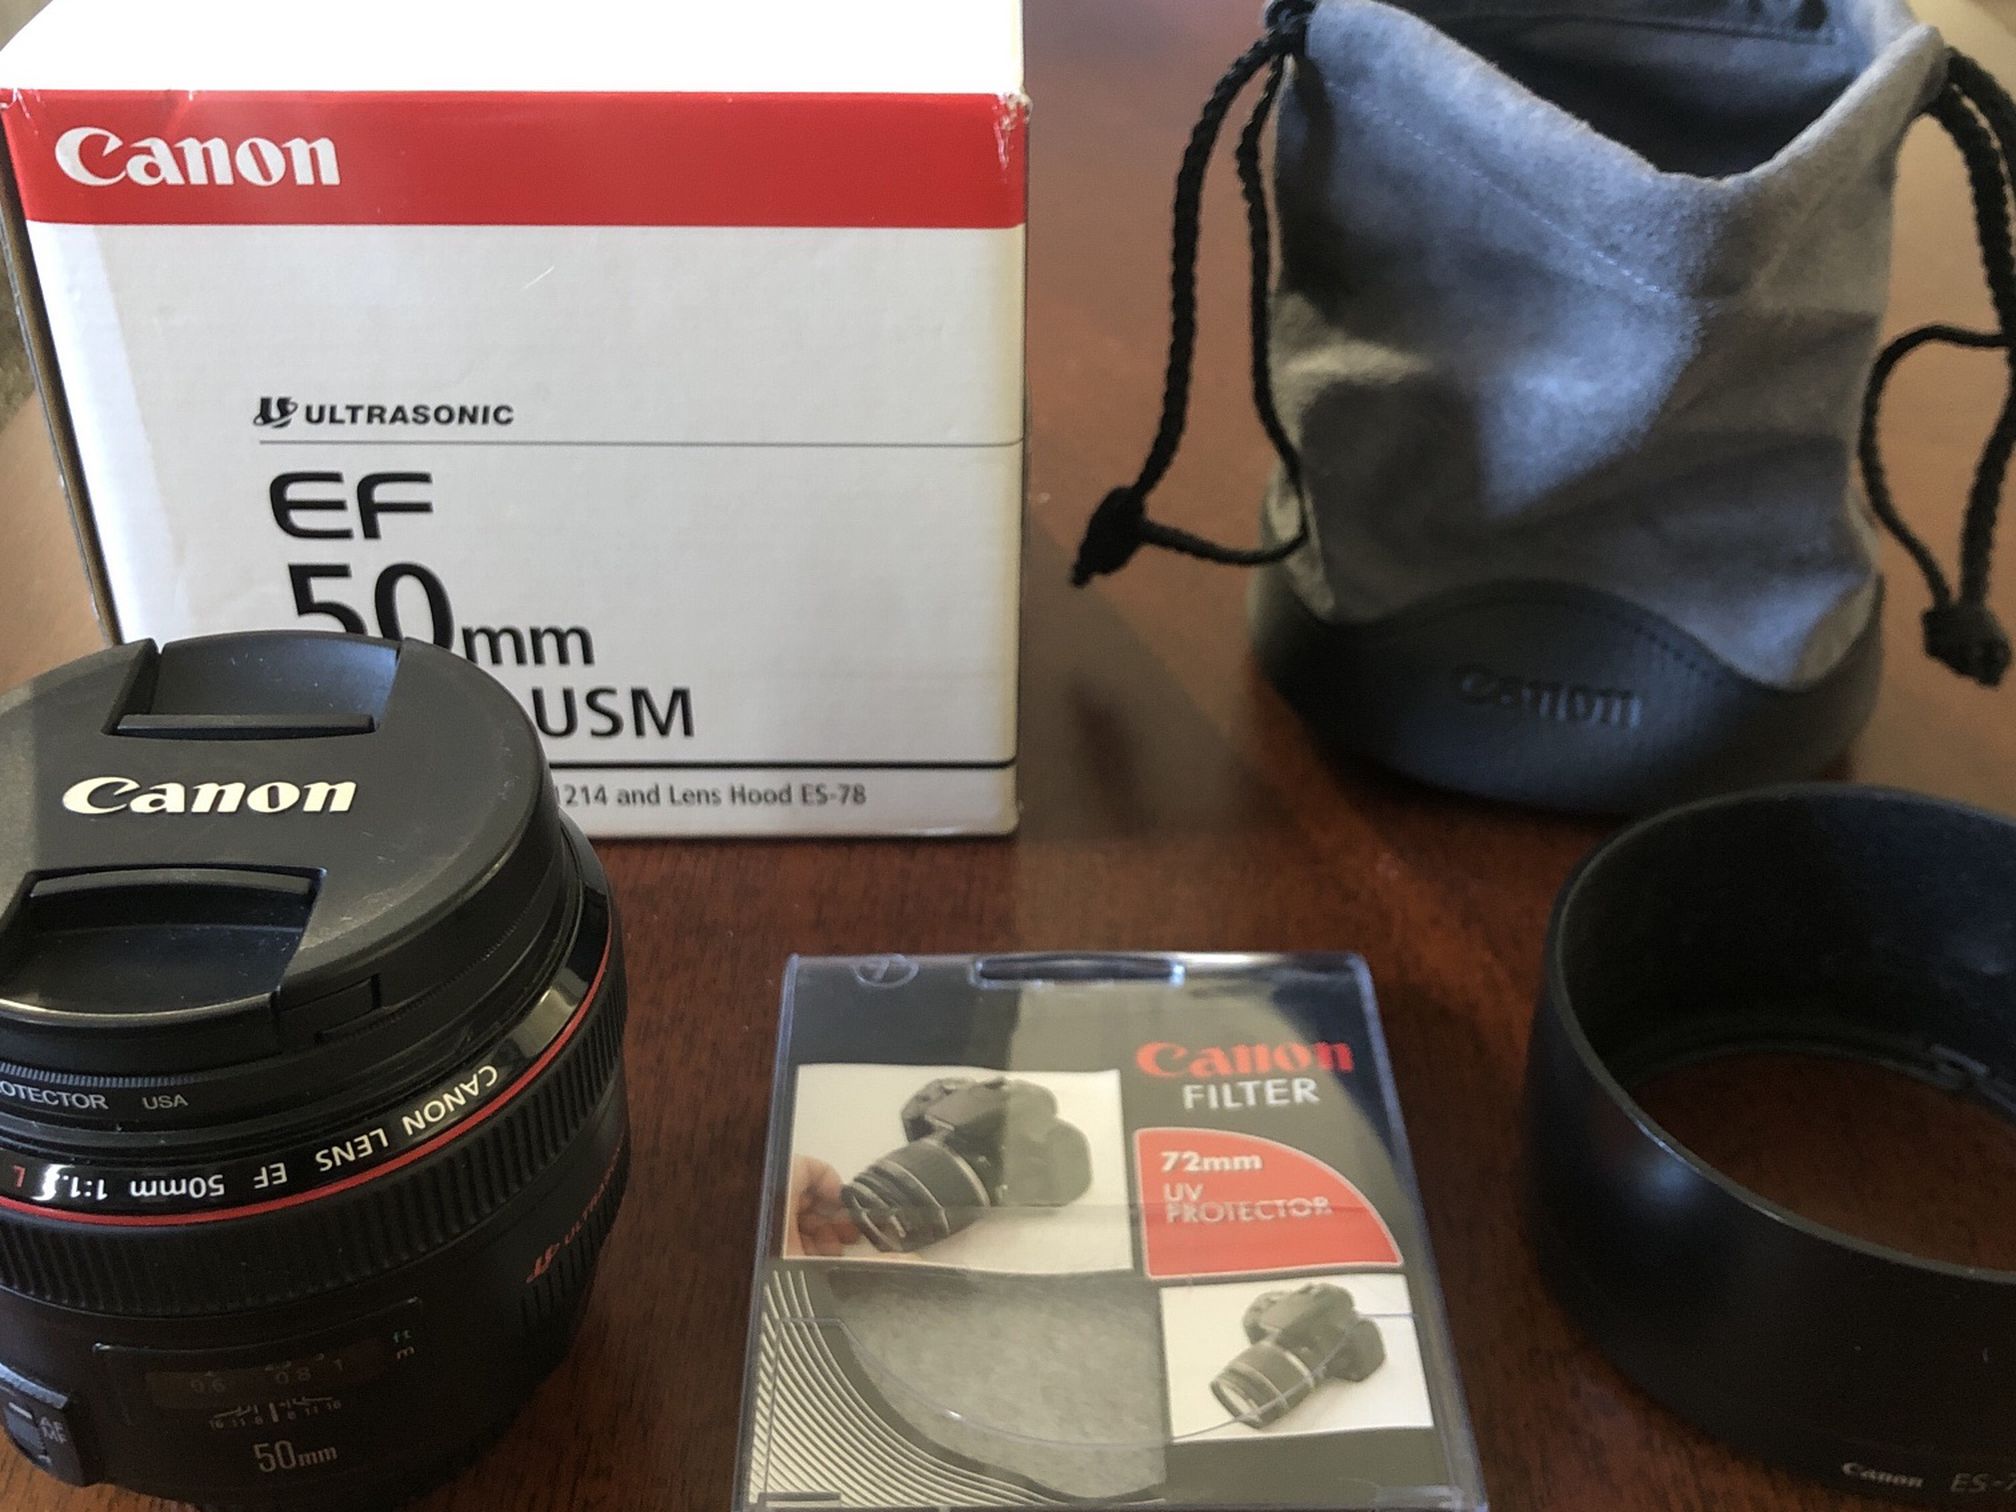 Canon EF 50mm f/1.2L USM Lens with UV Lens Protector